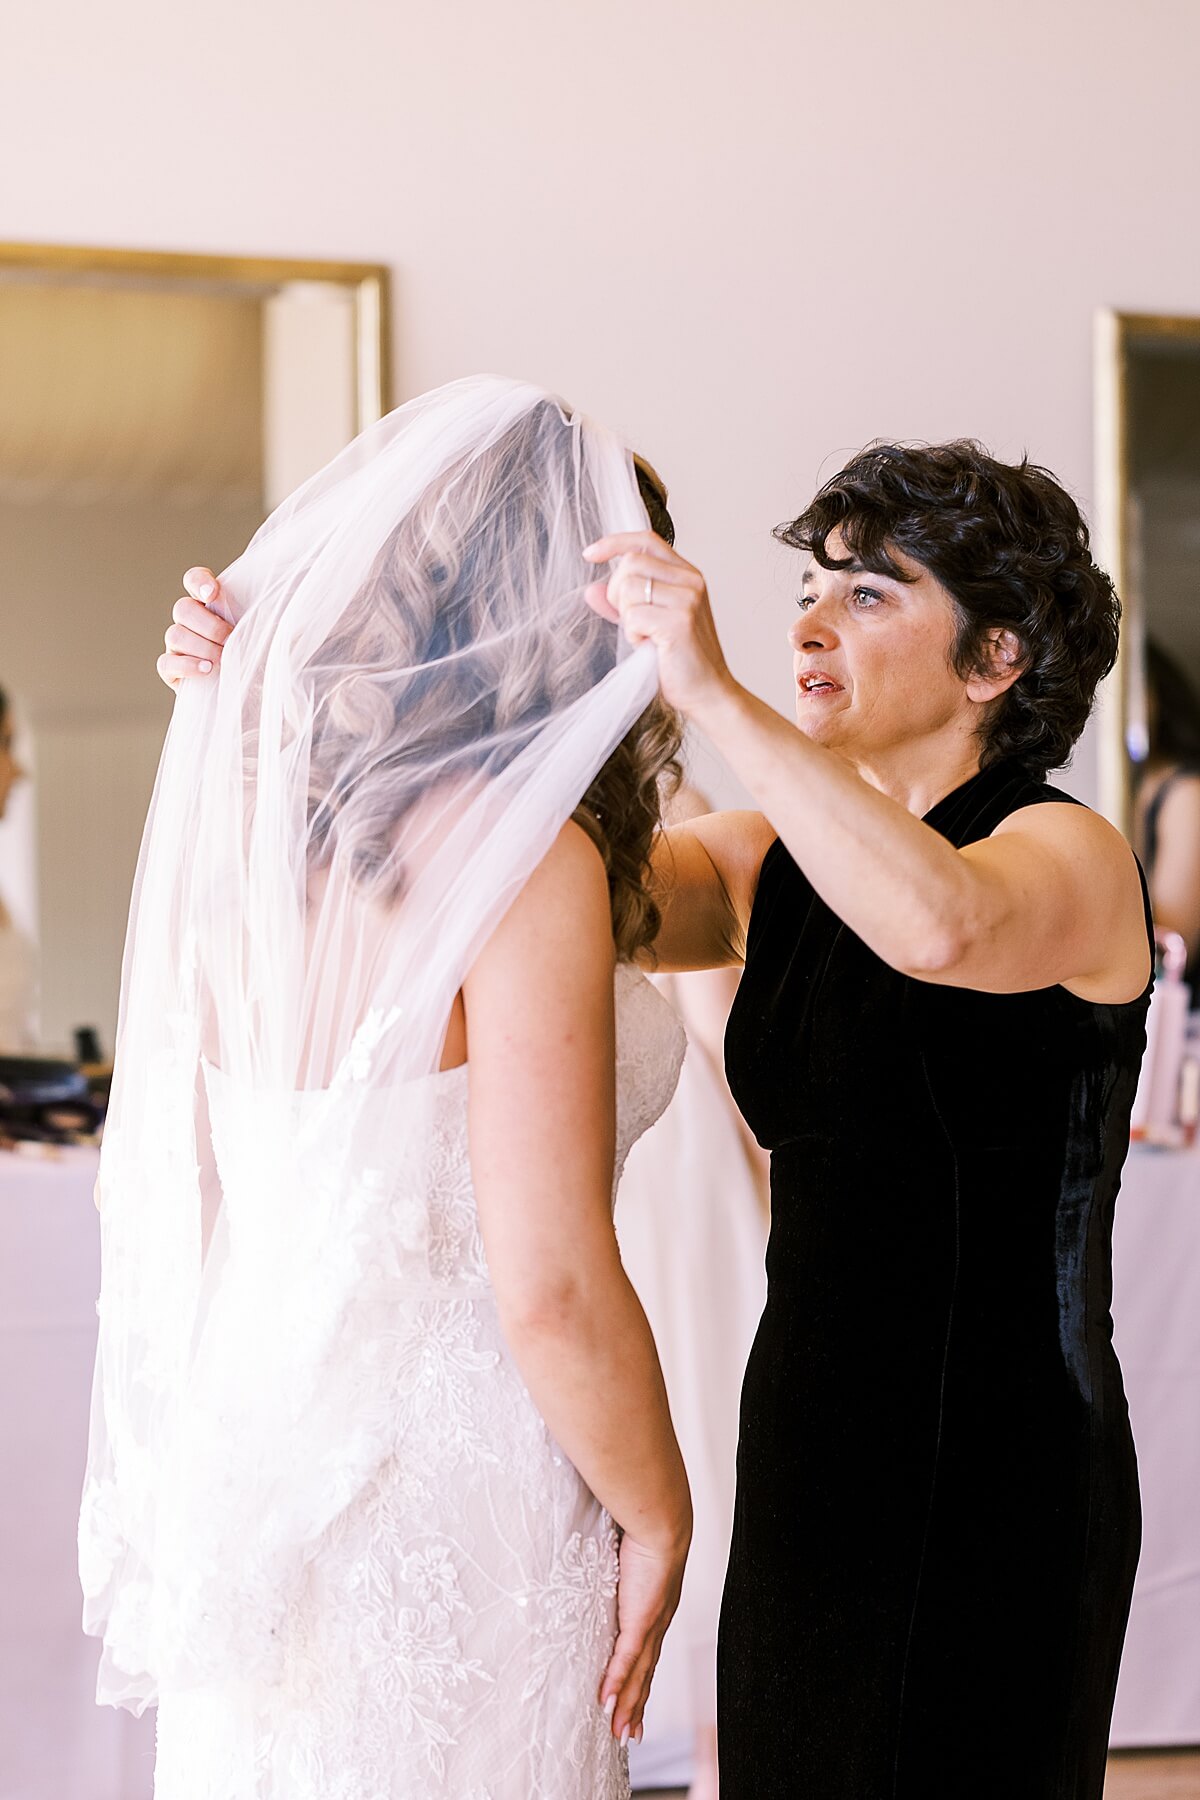 brides mom putting veil on her daughter